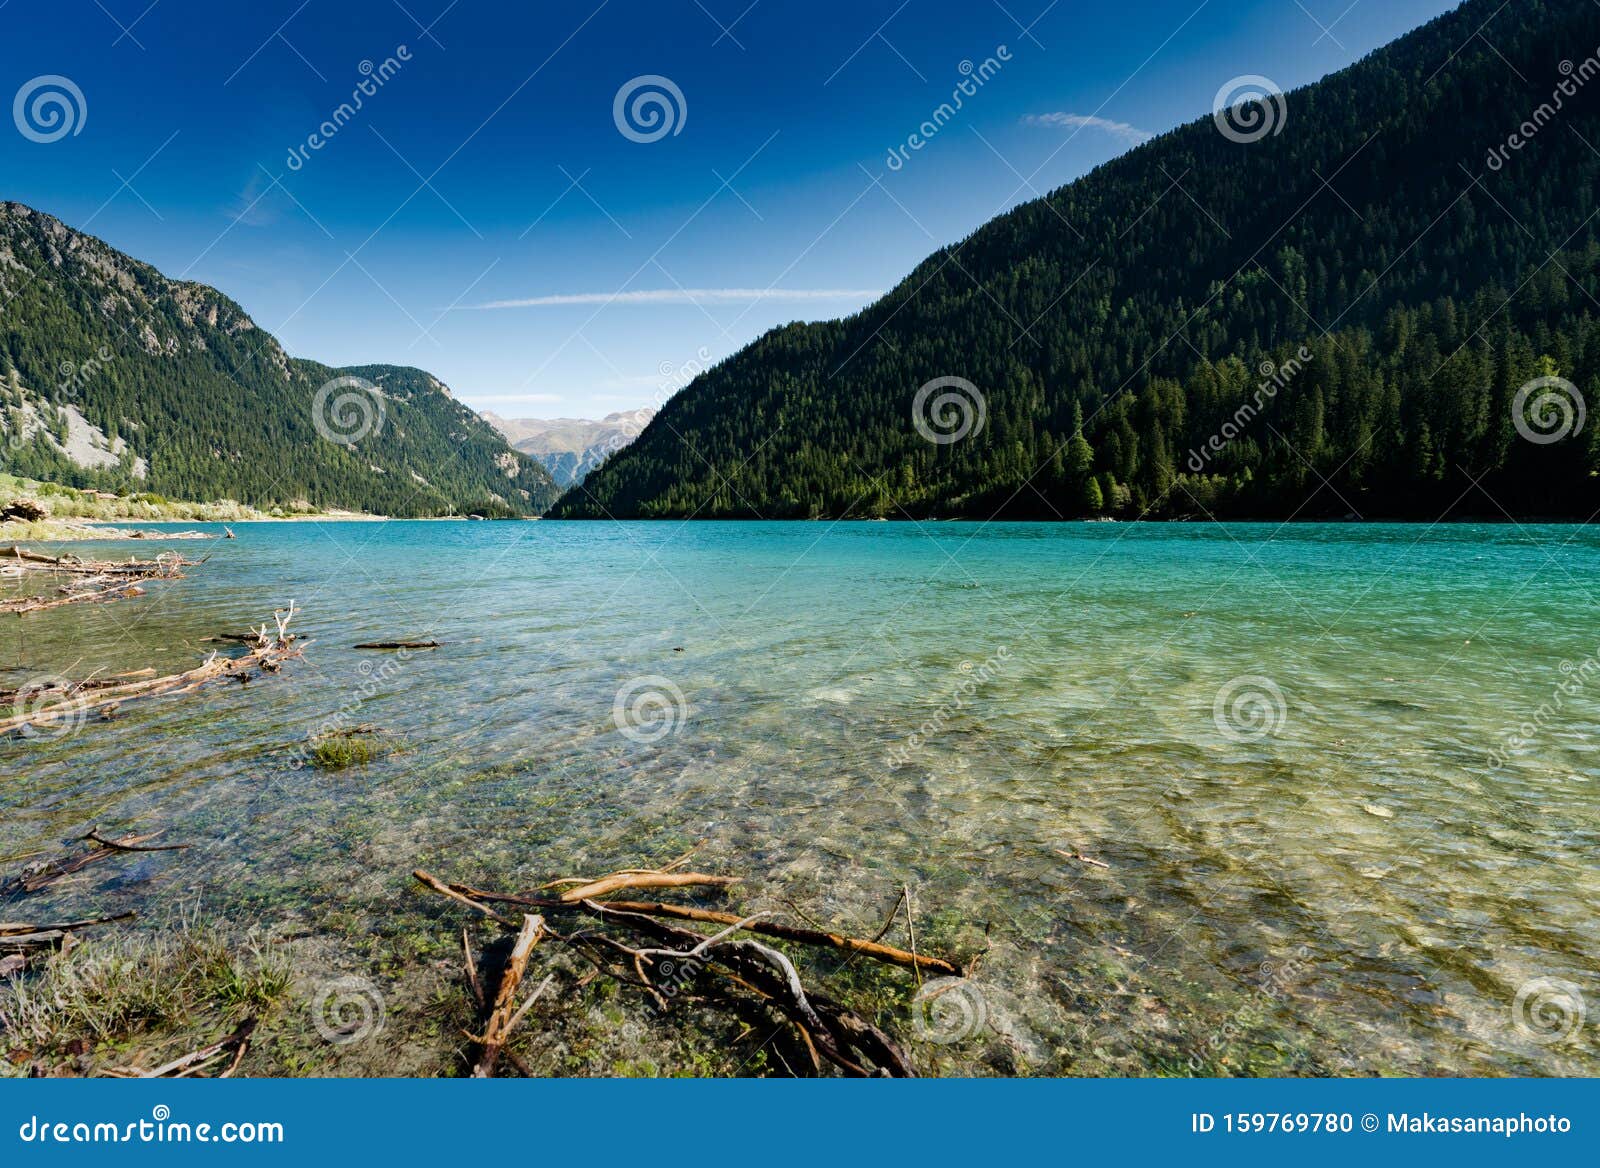 idyllic and picturesque turquoise mountain lake surrounded by green forest and mountain peaks in the swiss alps